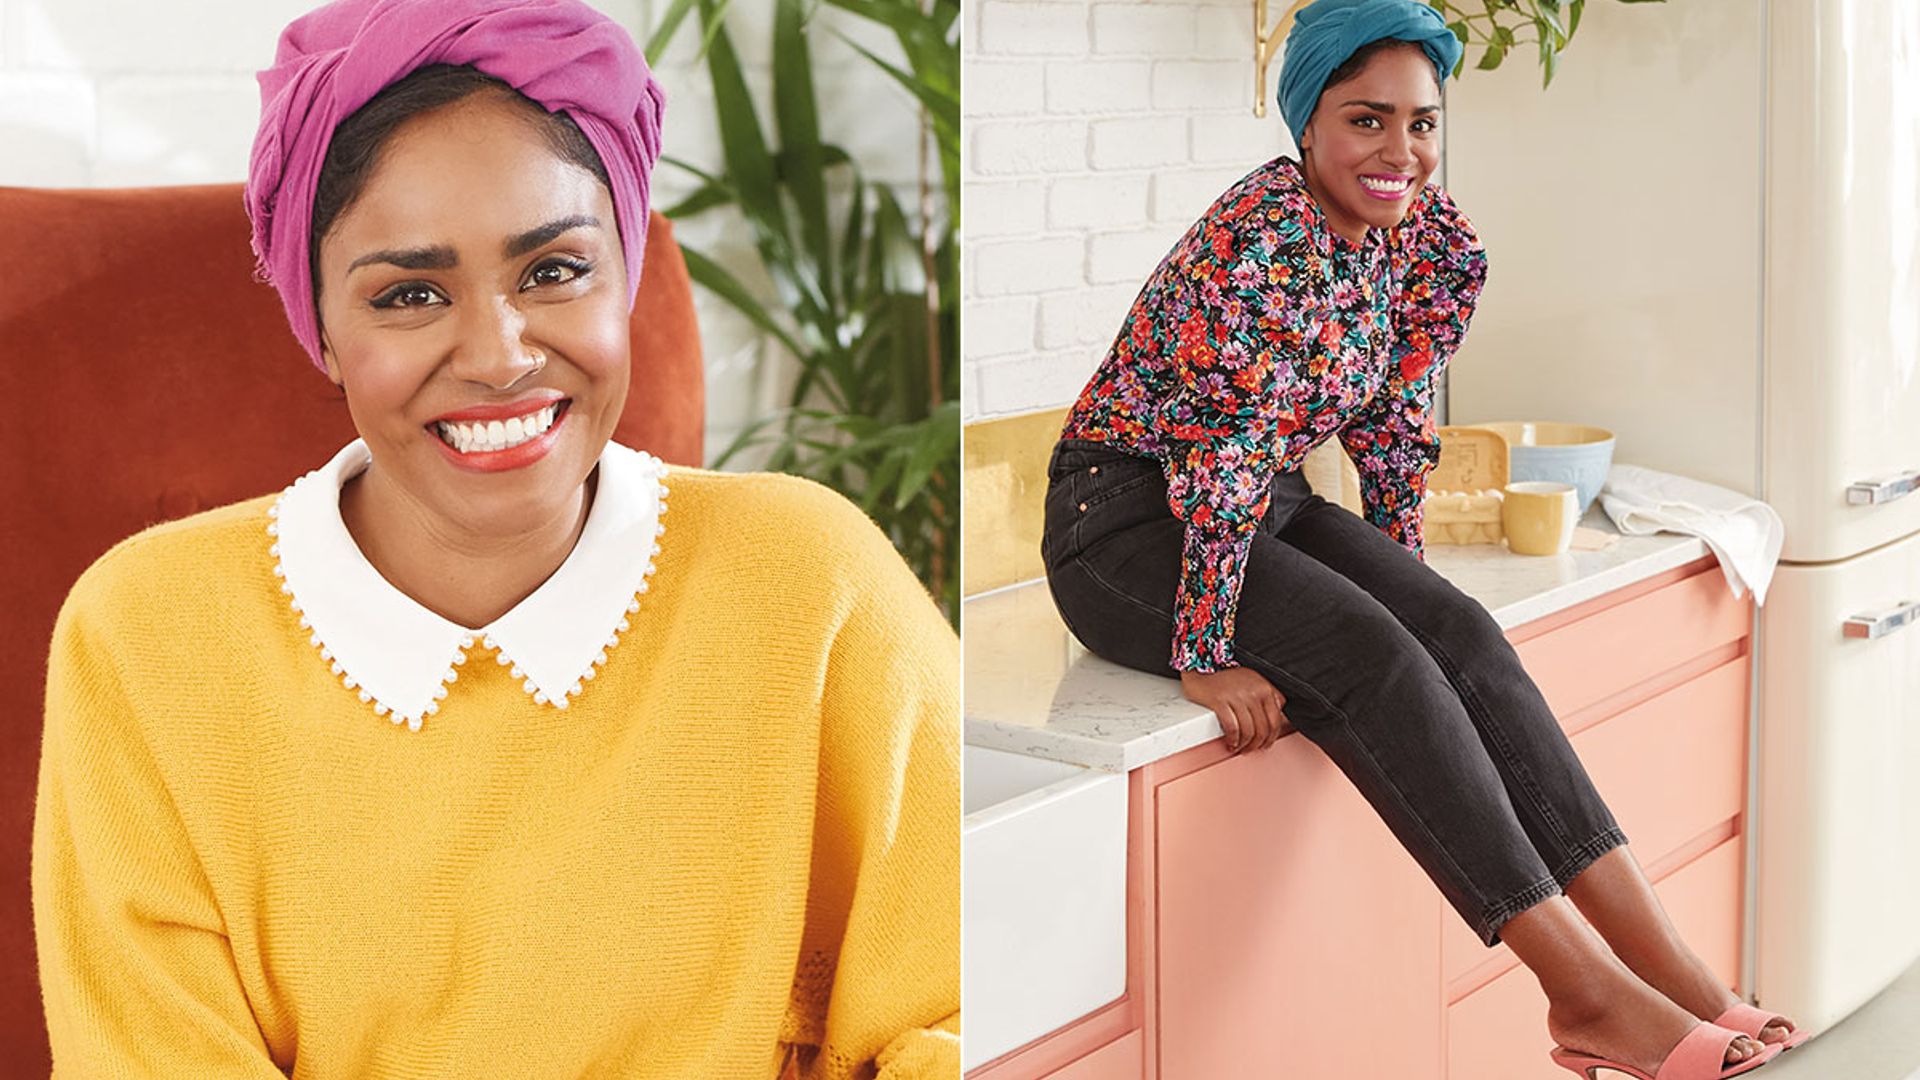 Exclusive: Nadiya Hussain on why lockdown was special as she unveils exciting new venture